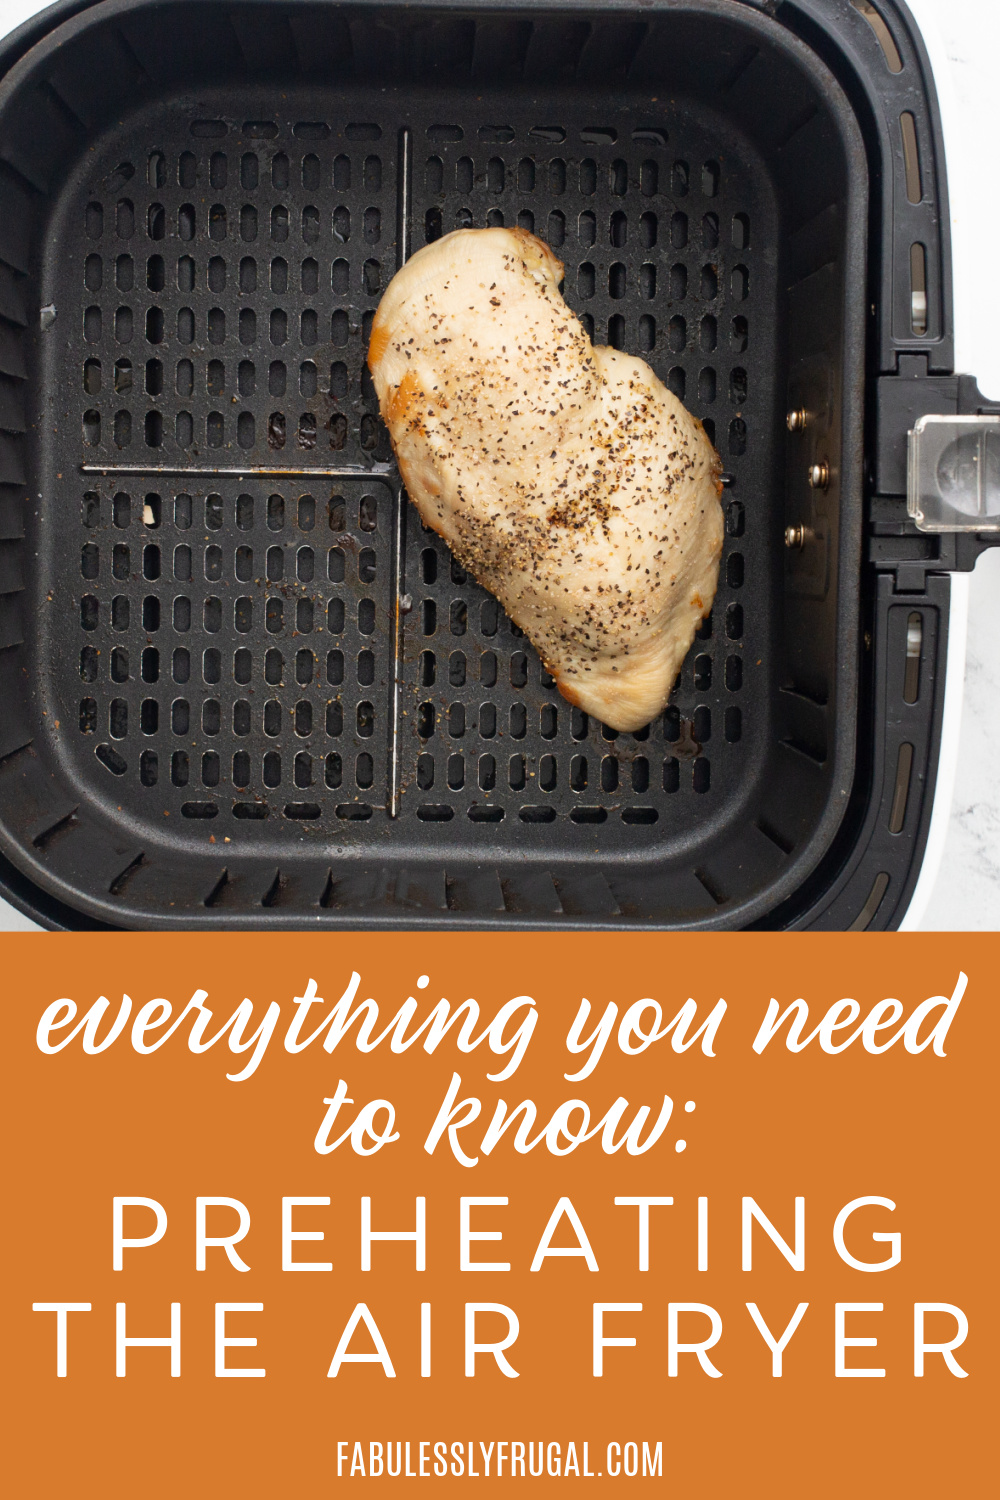 everything you need to know: preheating the air fryer text with cooked chicken breast in air fryer